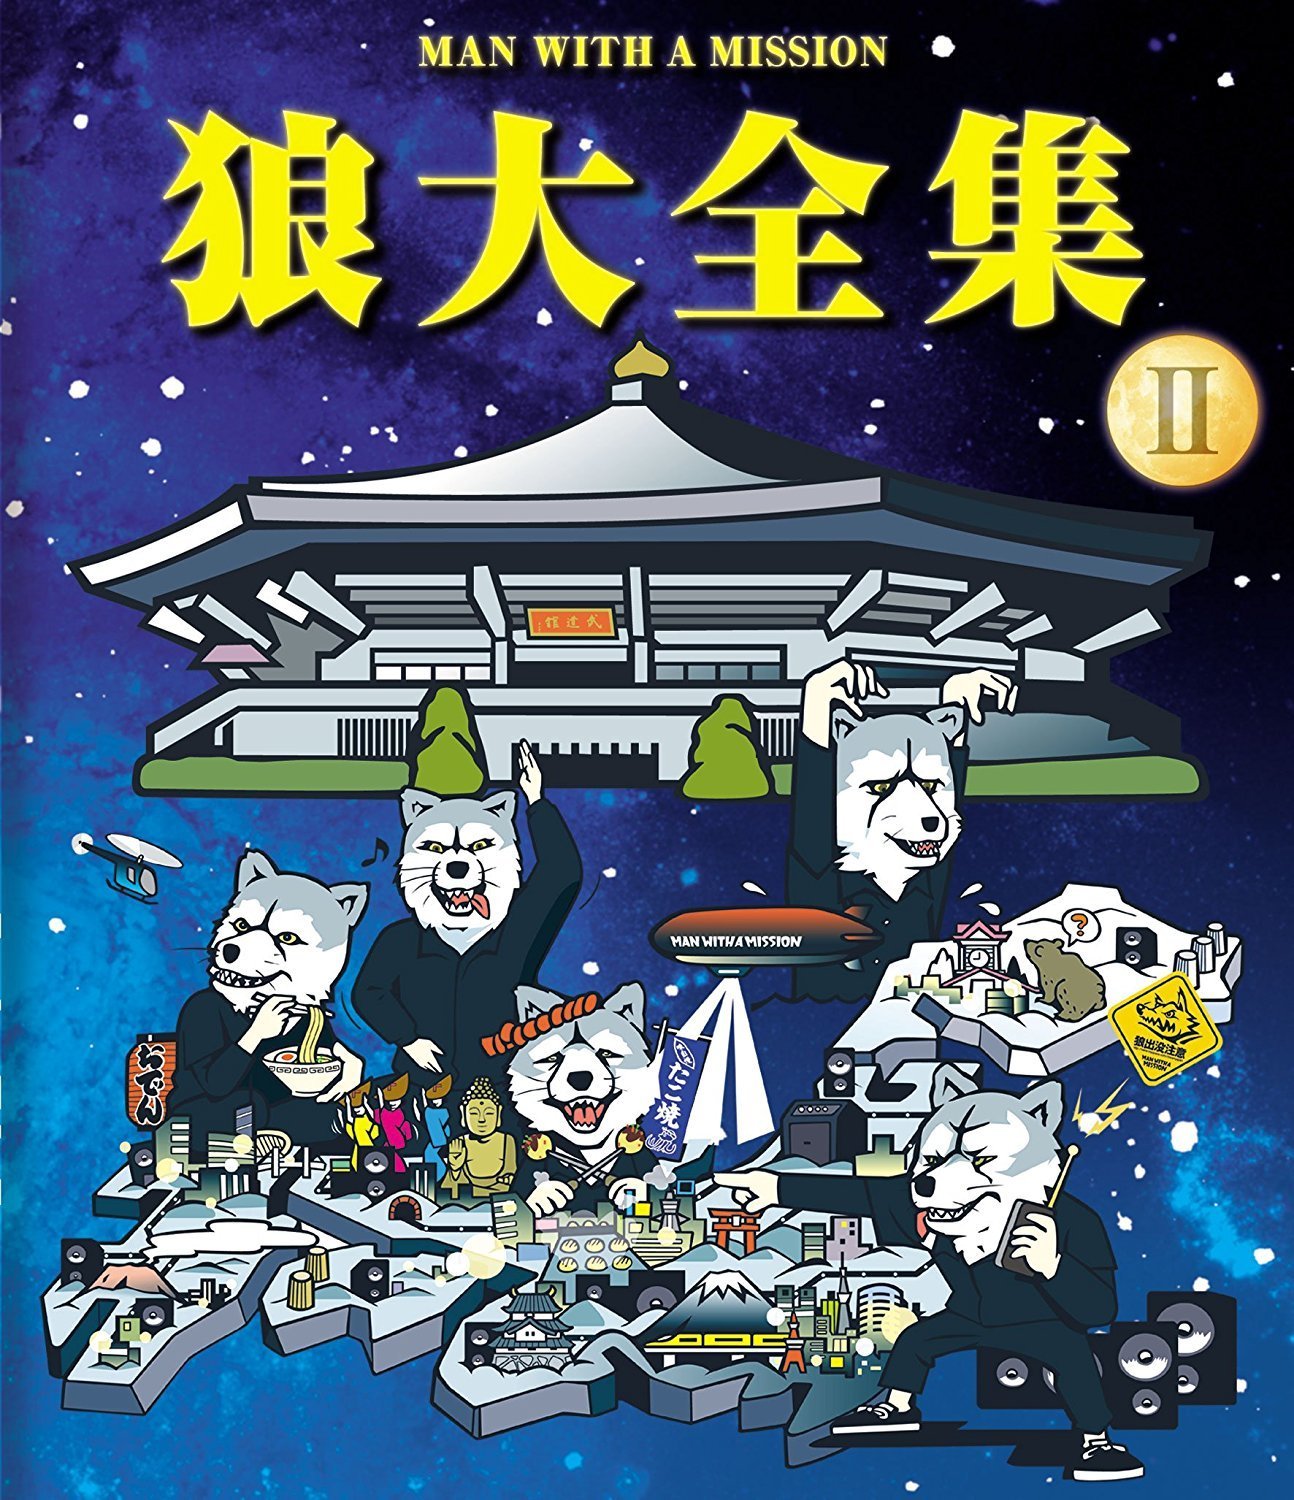 MAN WITH A MISSION 狼大全集 全５枚 コンプリート DVD